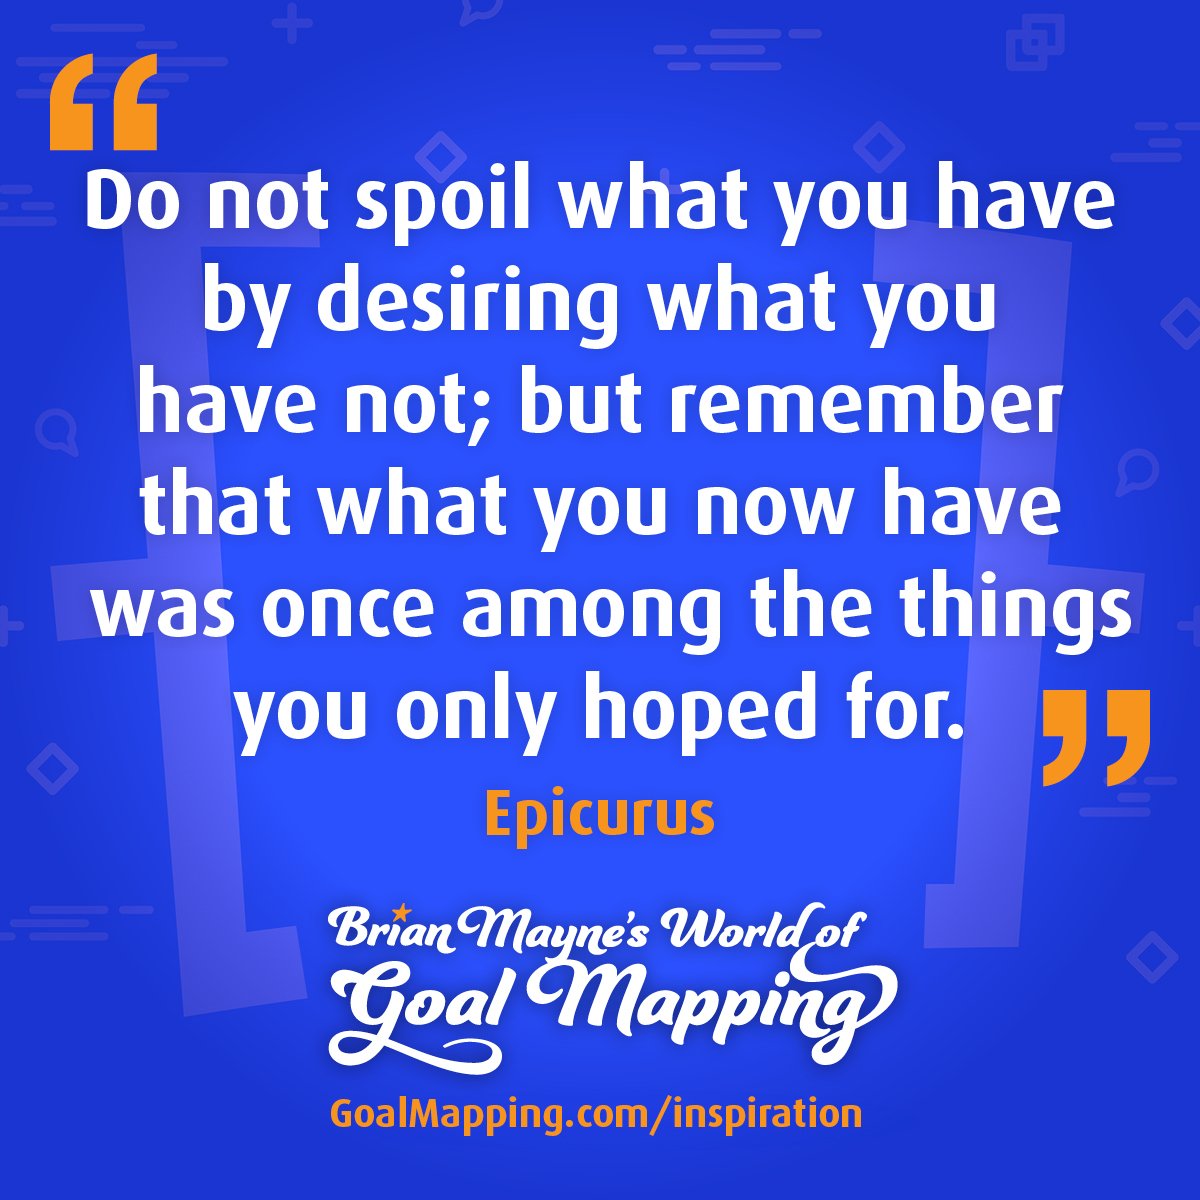 "Do not spoil what you have by desiring what you have not; but remember that what you now have was once among the things you only hoped for." Epicurus